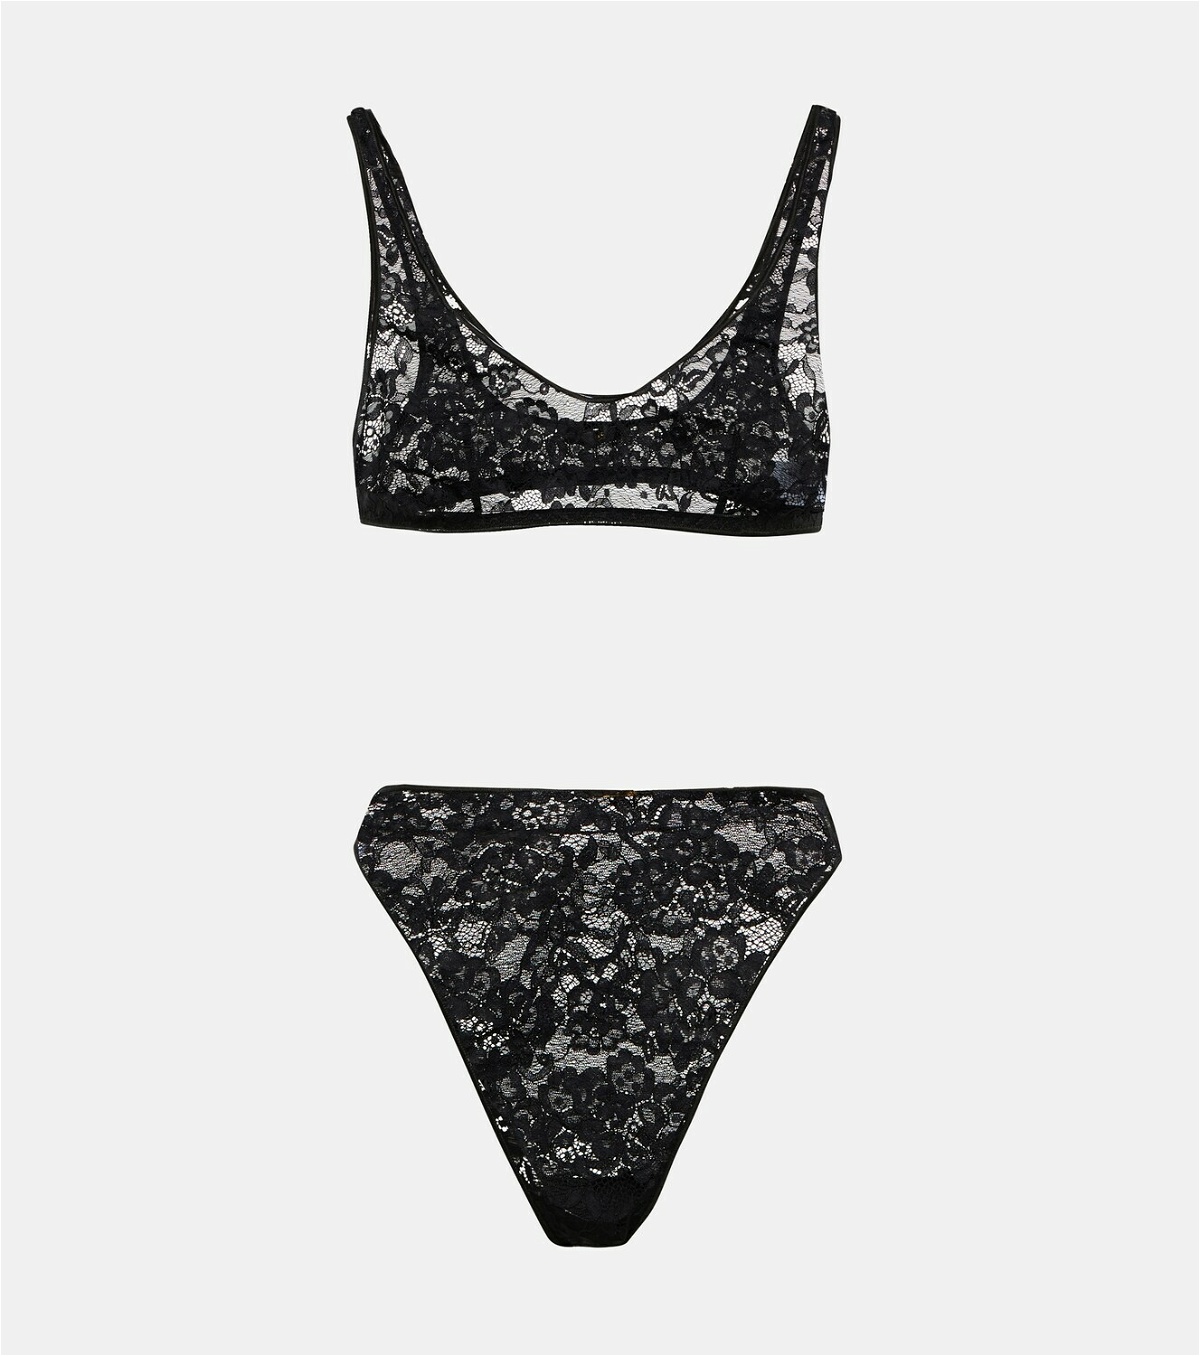 Oseree - Lace bra and underwear set